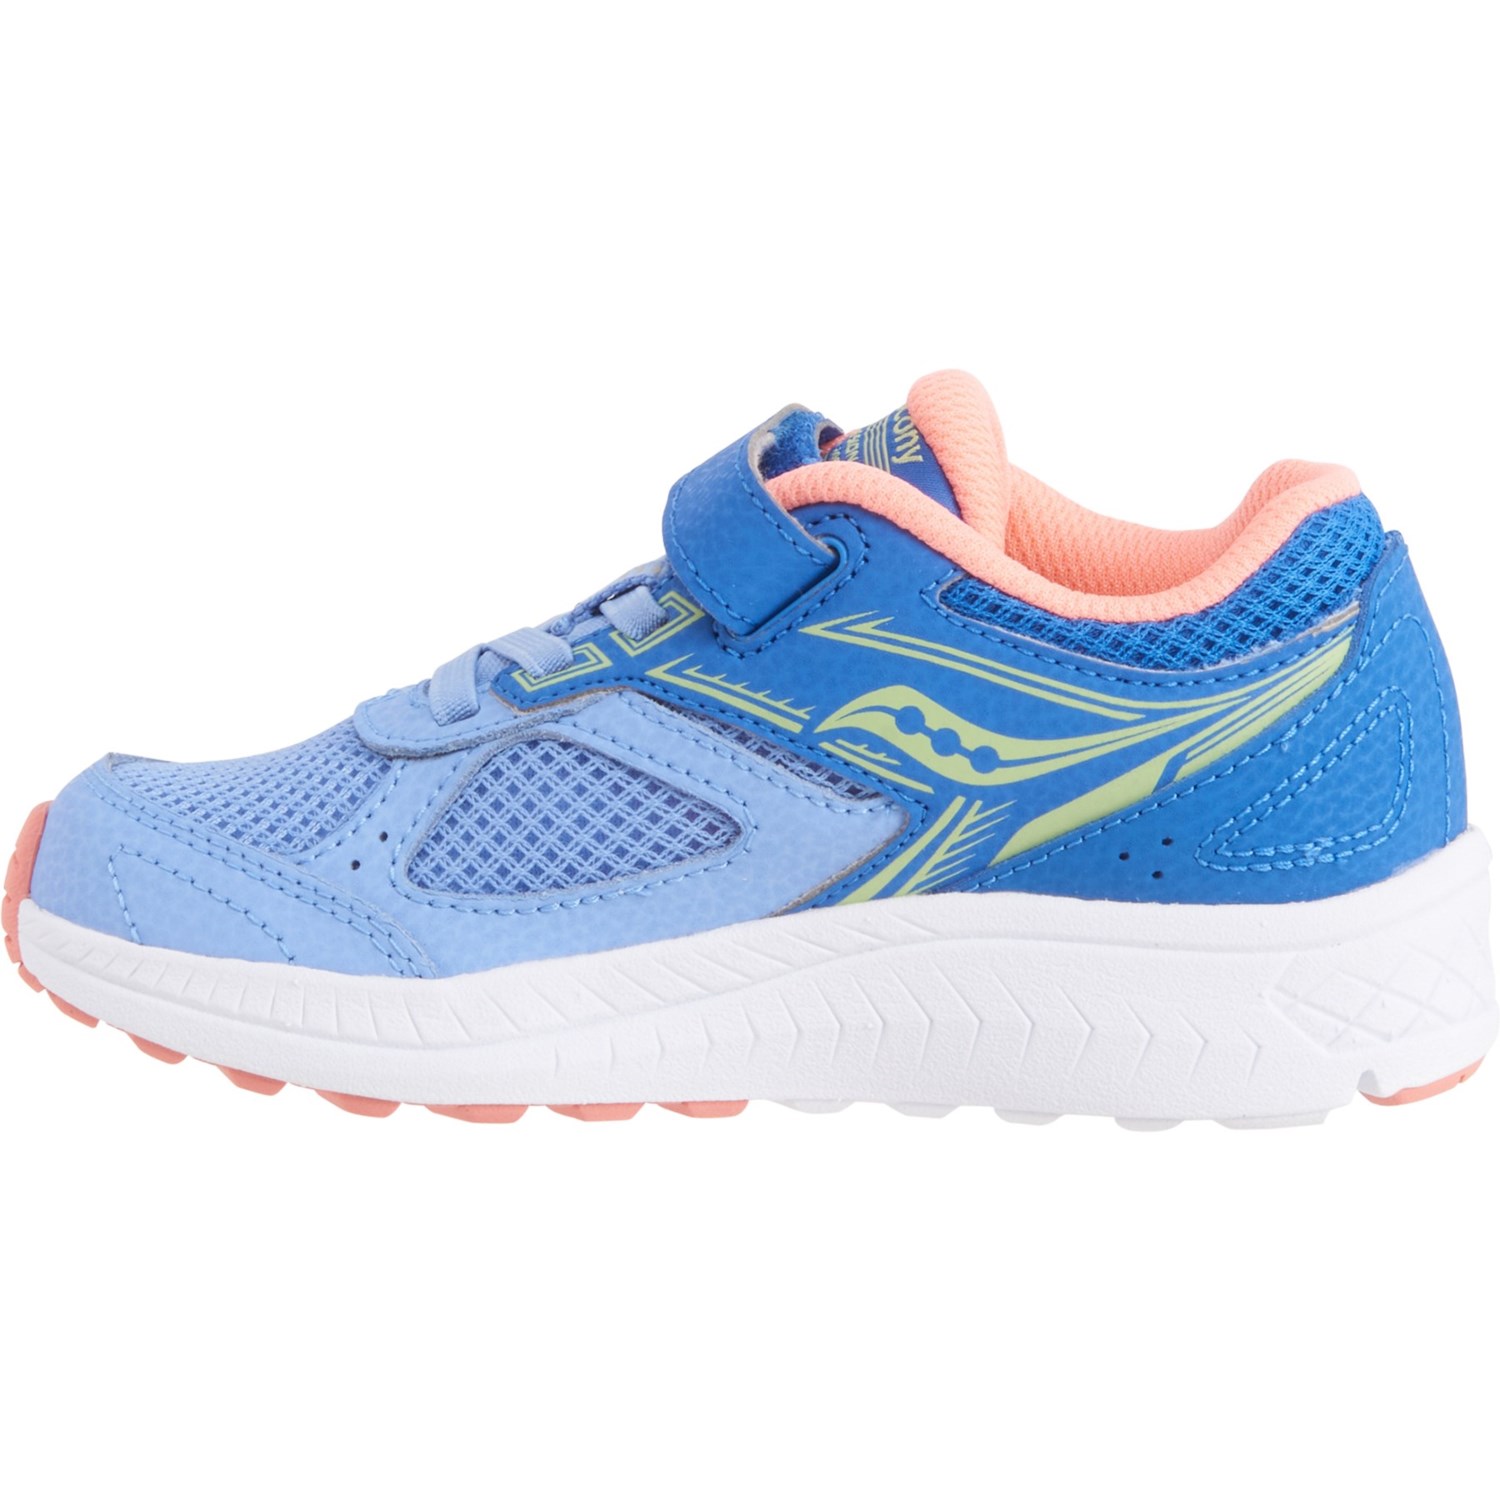 saucony cohesion 10 a/c running shoes